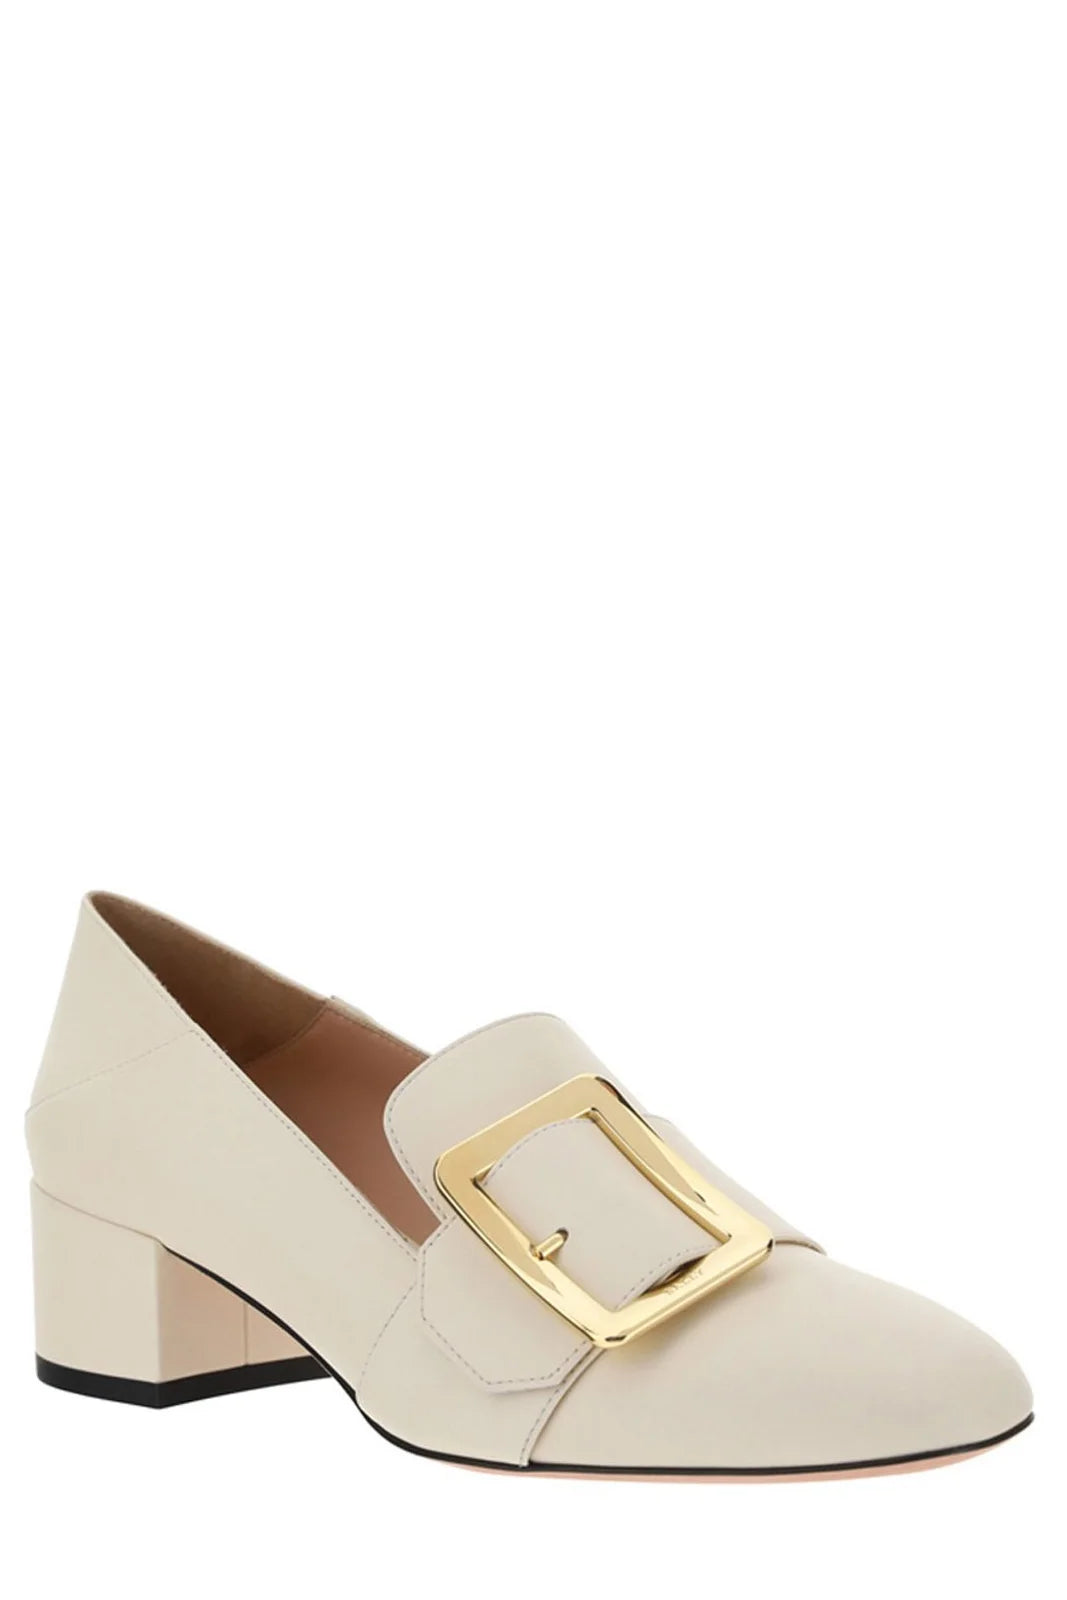 Bally Janelle 40/711 Buckle Detailed Pumps